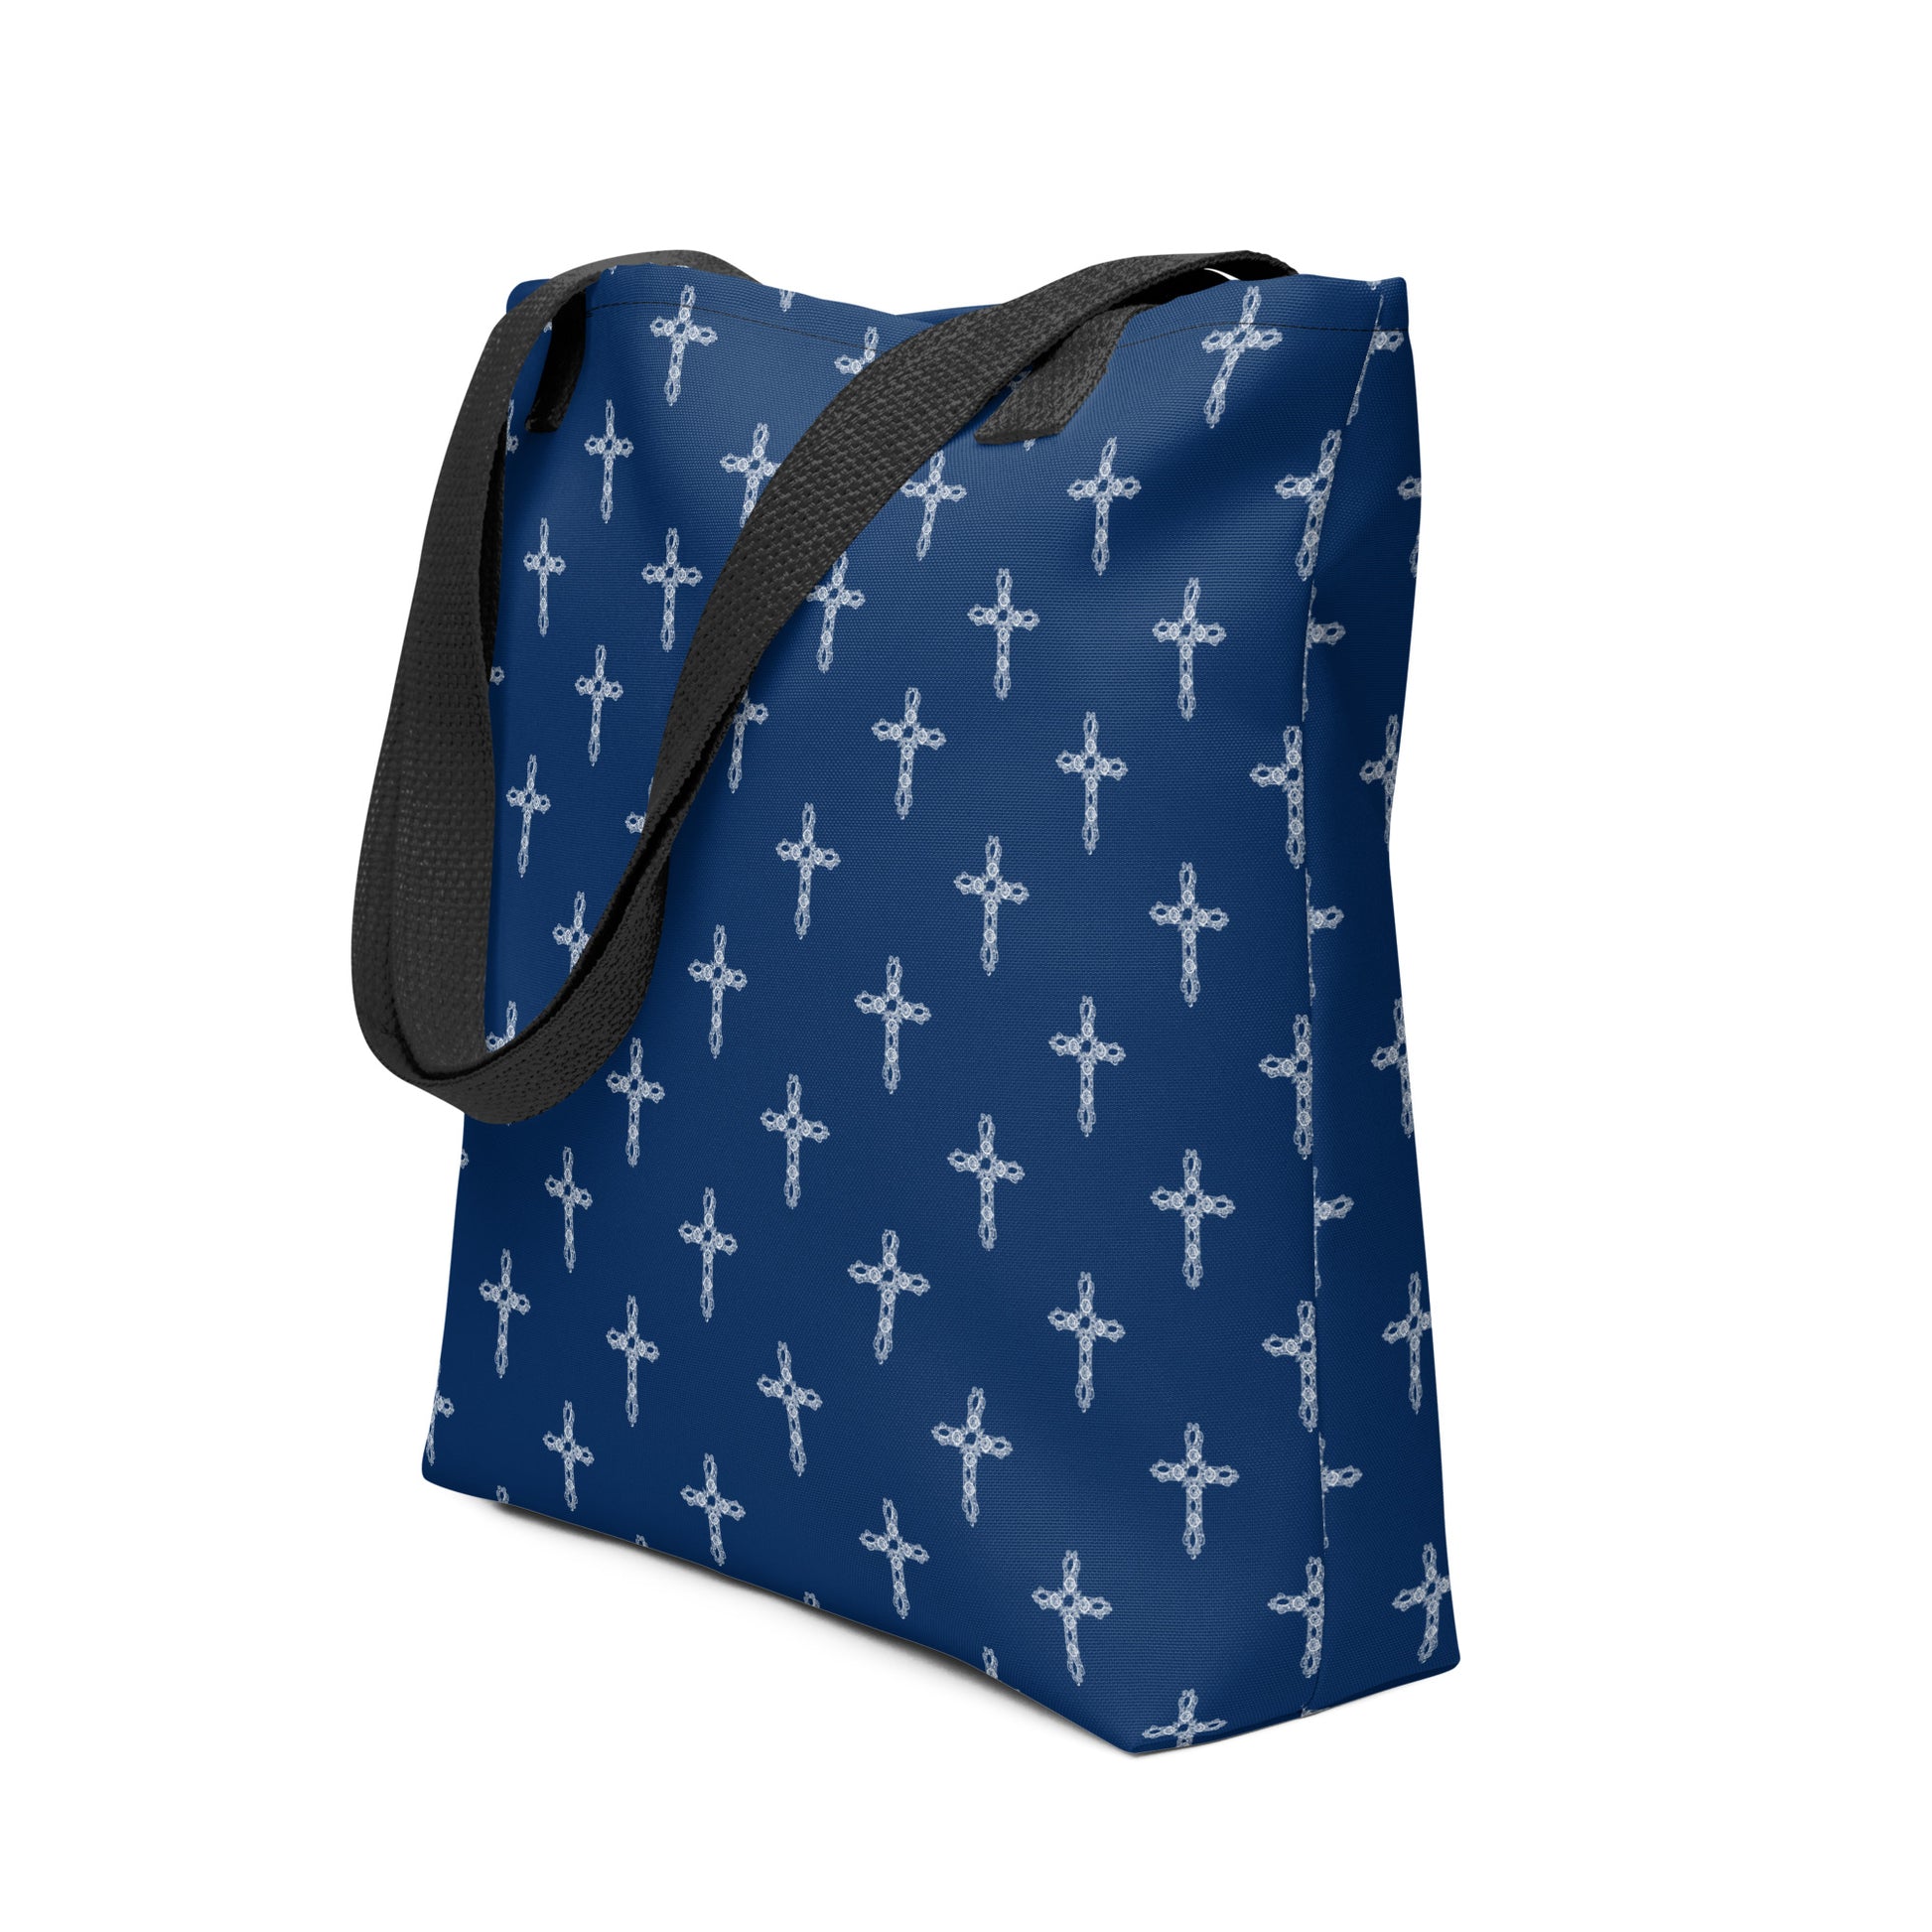 Navy blue tote bag or purse with white crosses on it and black handles flipped over the side.